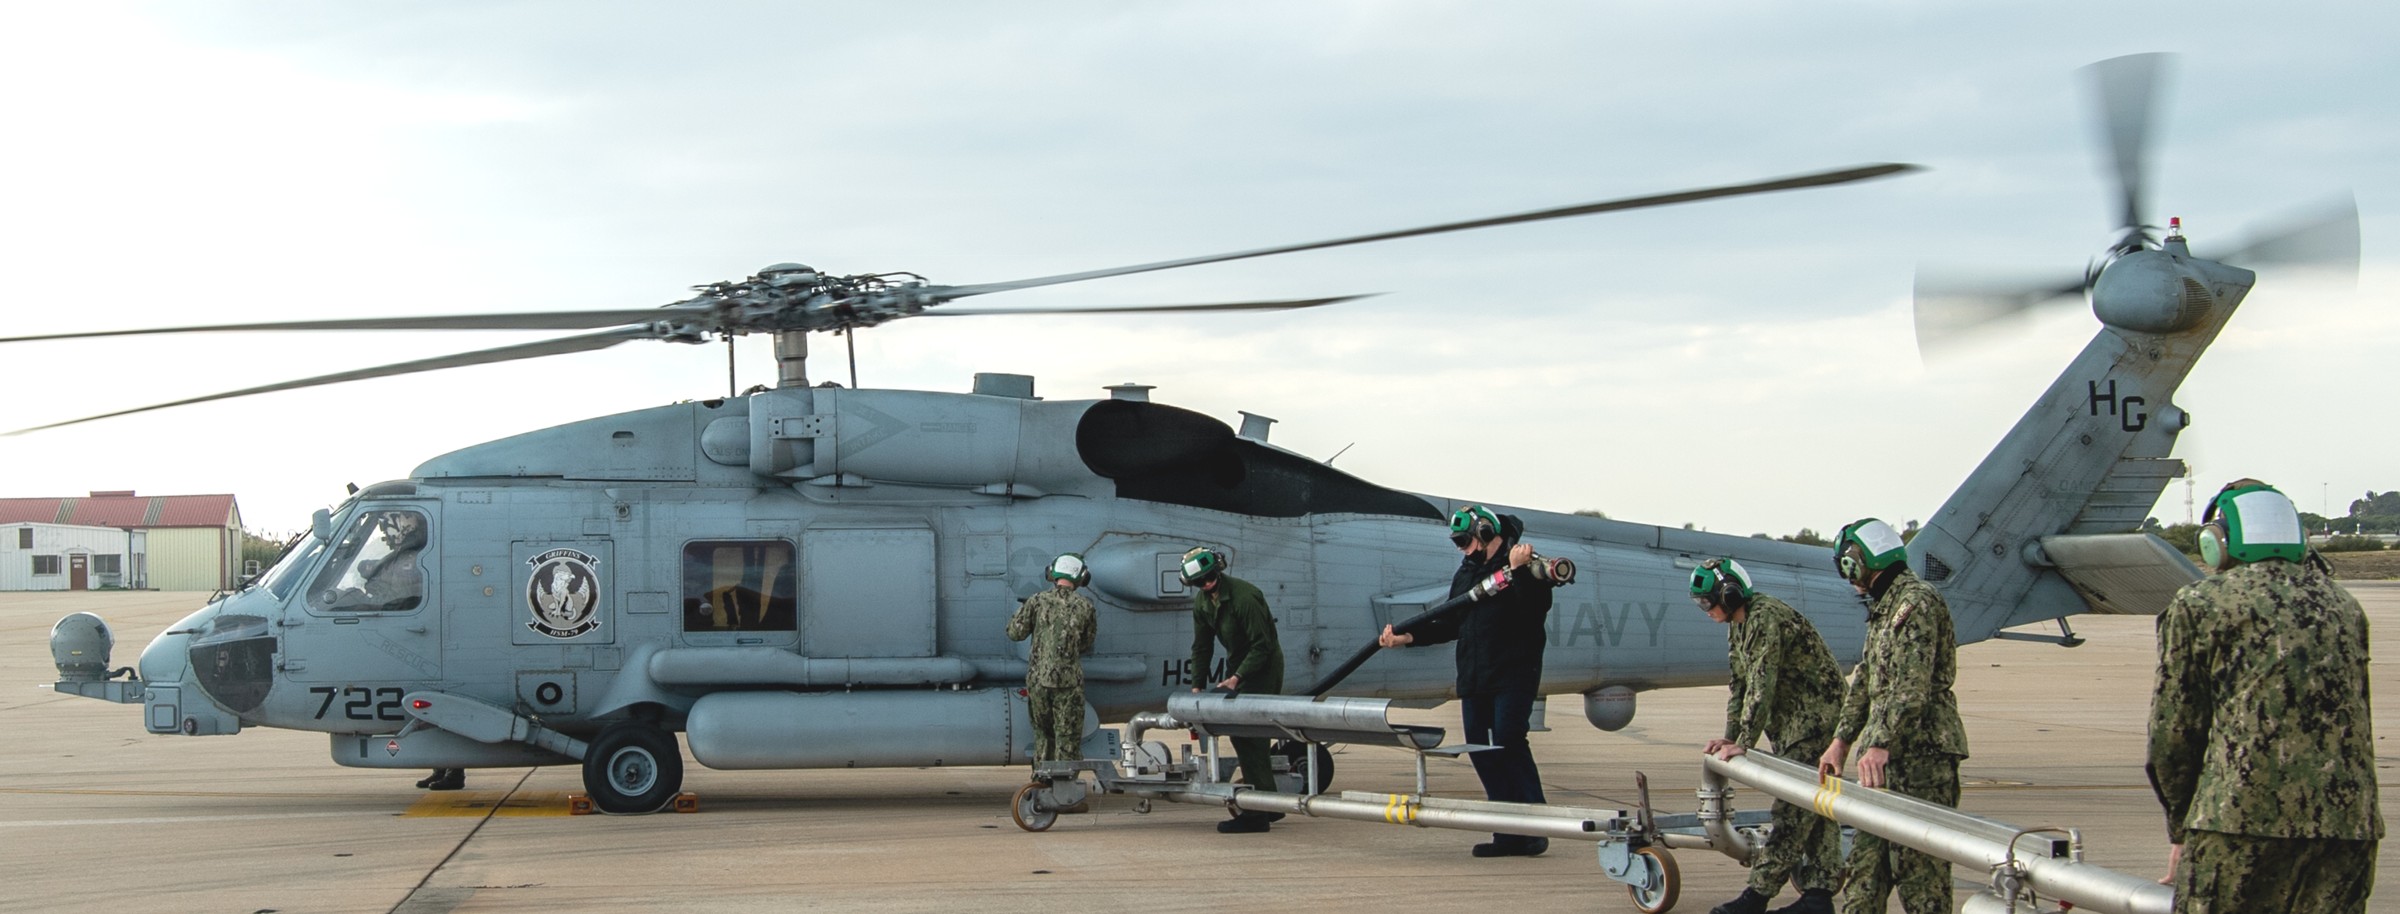 hsm-79 griffins helicopter maritime strike squadron mh-60r seahawk naval station rota spain 42